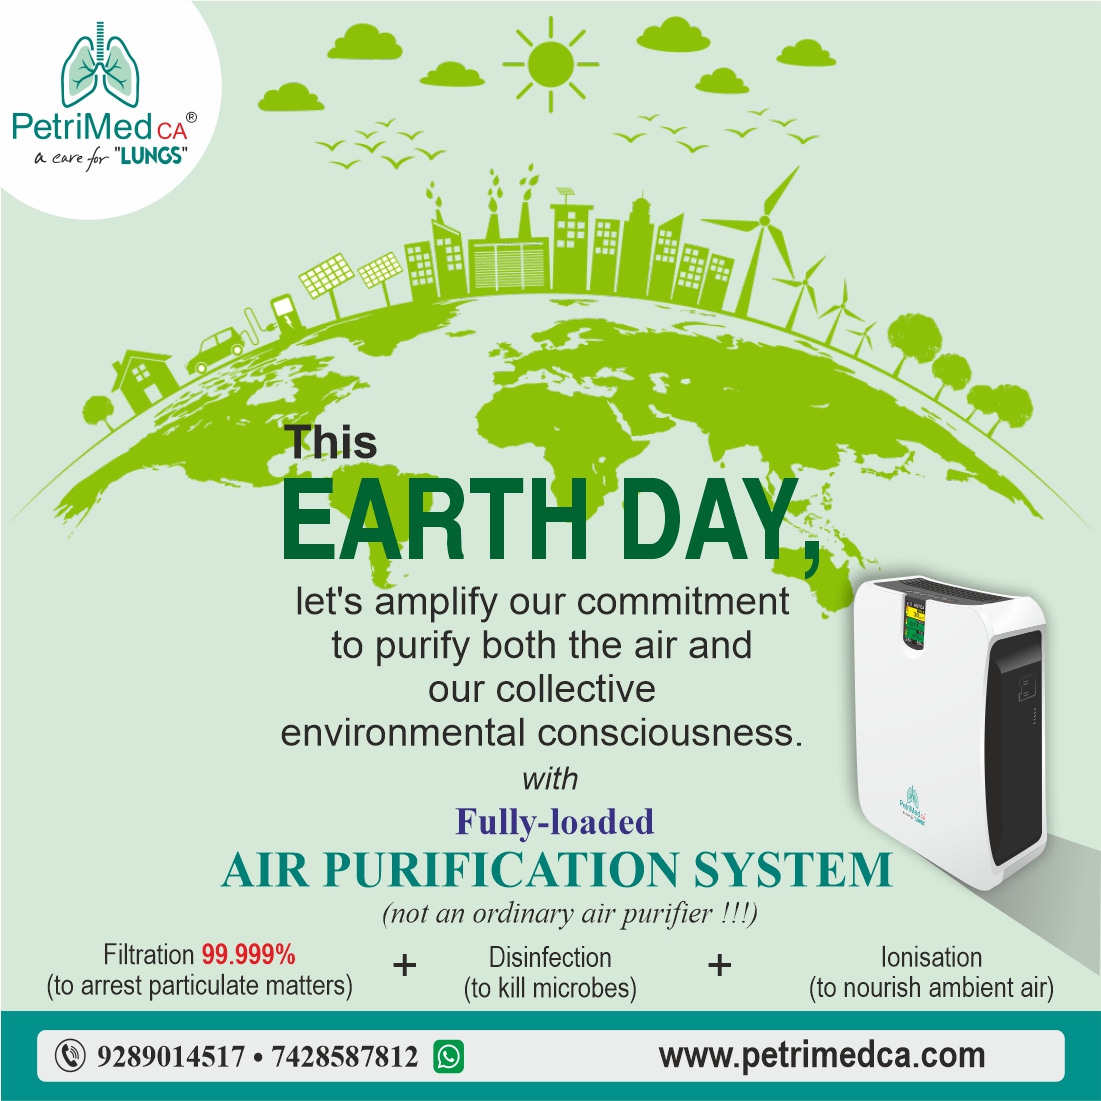 'Breathing clean air isn't just a luxury, it's a necessity. This #EarthDay, let's amplify our commitment to purify not just the air around us but also our collective consciousness towards environmental stewardship.'
#petrimedca #AirPurifier #indoorairquality #airquality